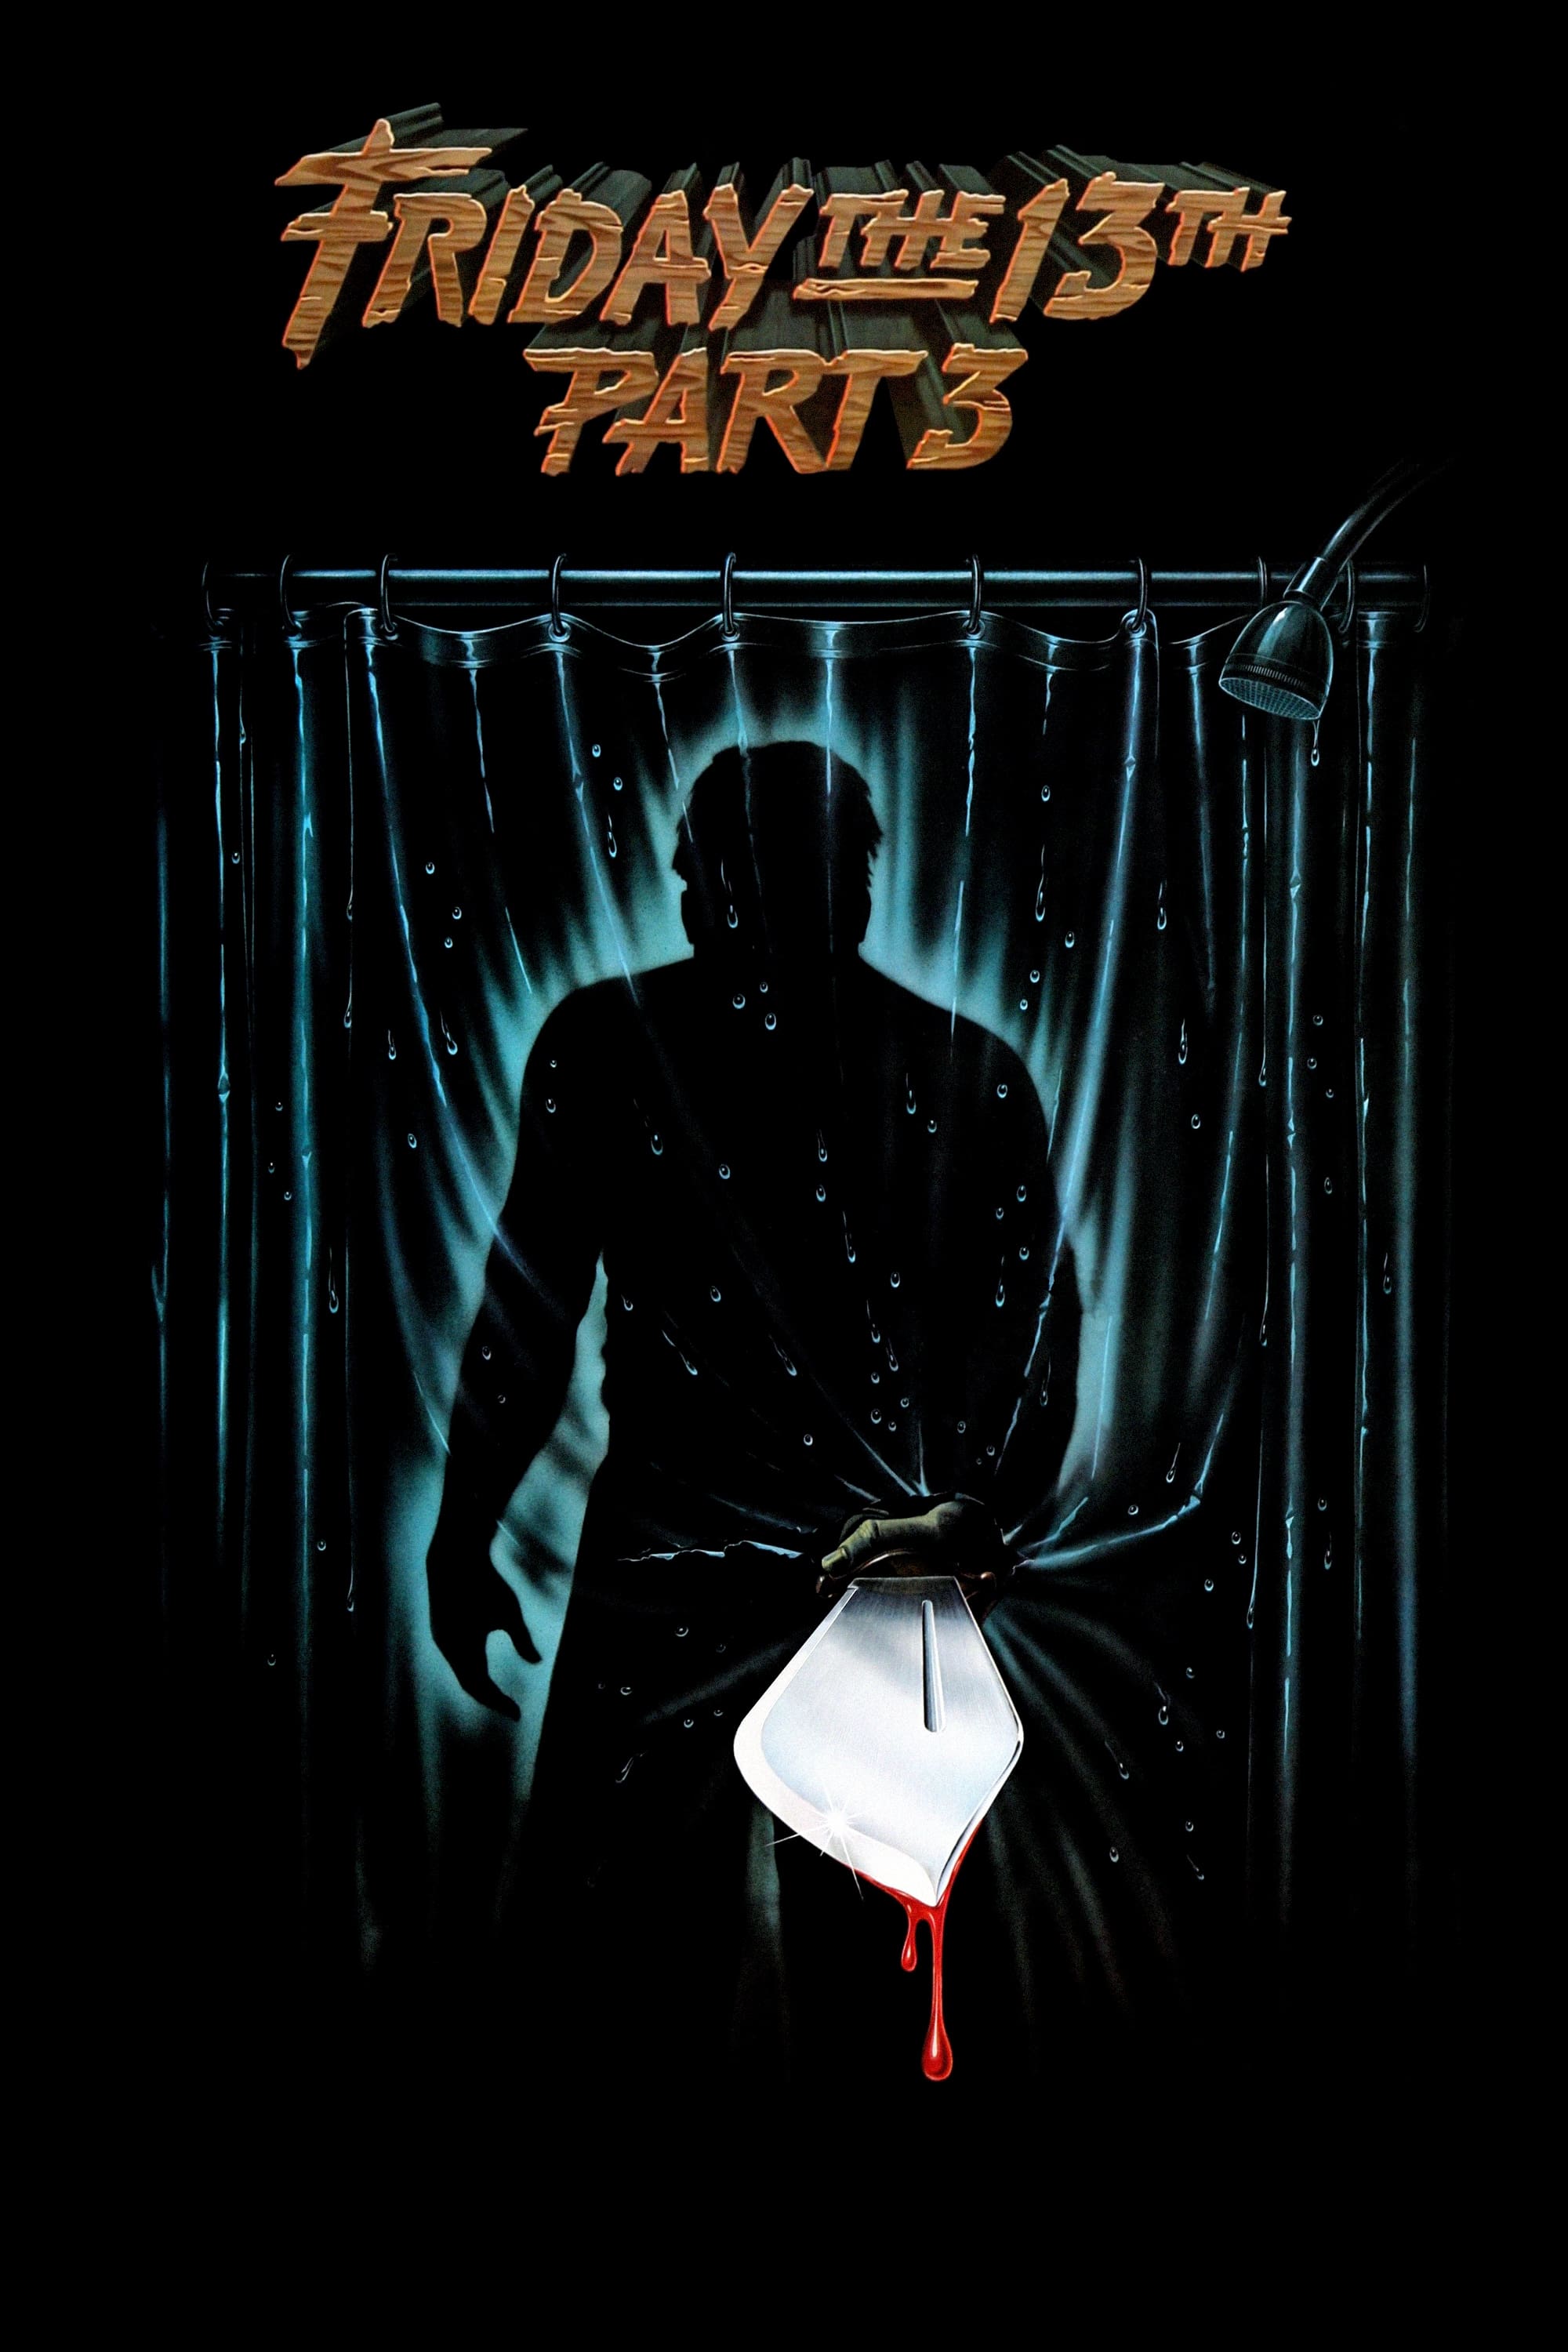 Friday the 13th Part III movie gloss Poster 17x 24 inches 1982